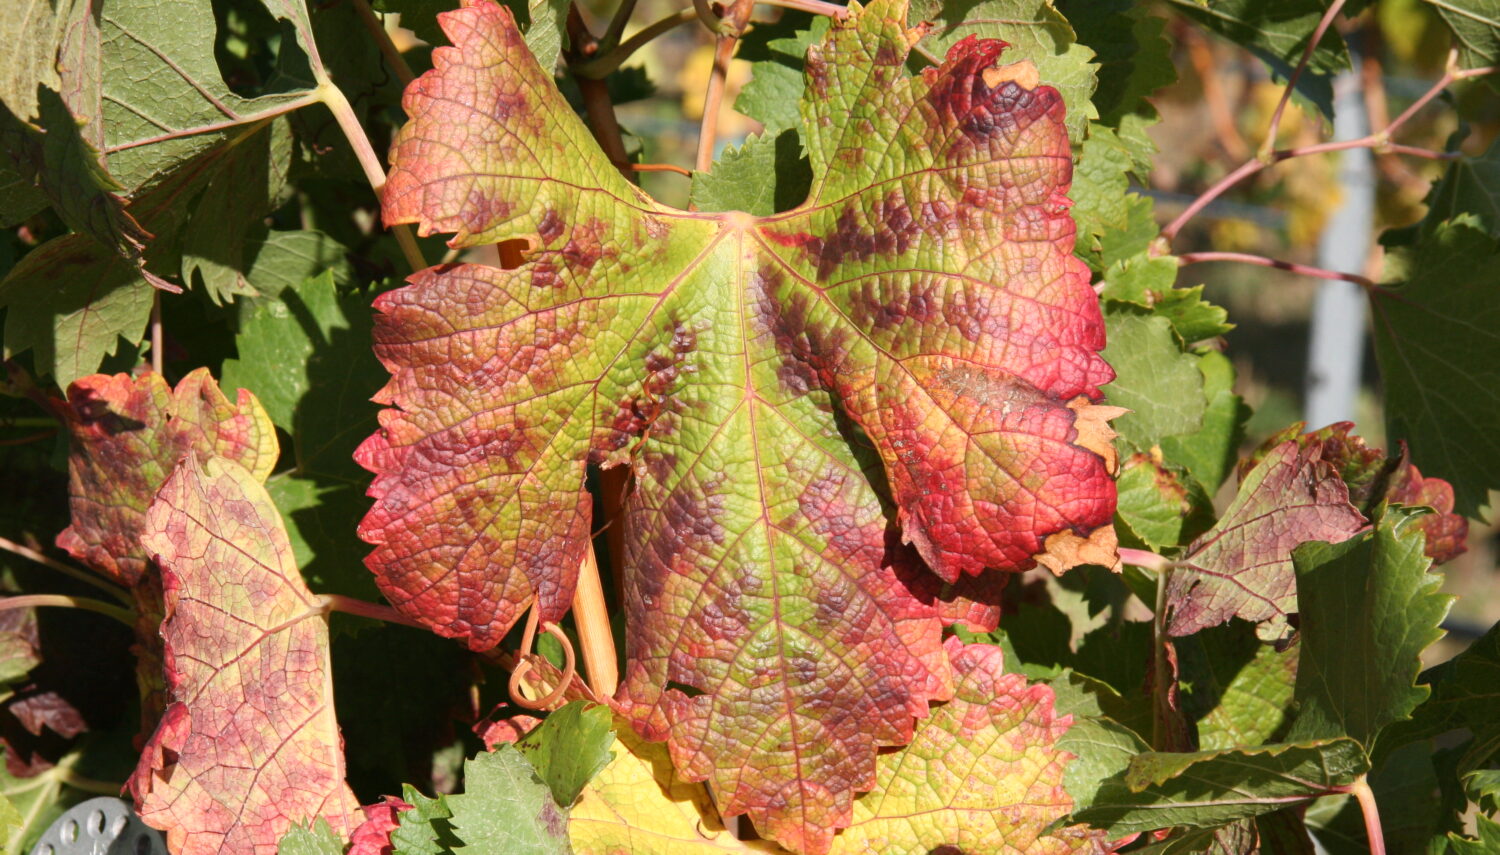 A grape leaf with red coloration at the edges, in front of other grape leaves.